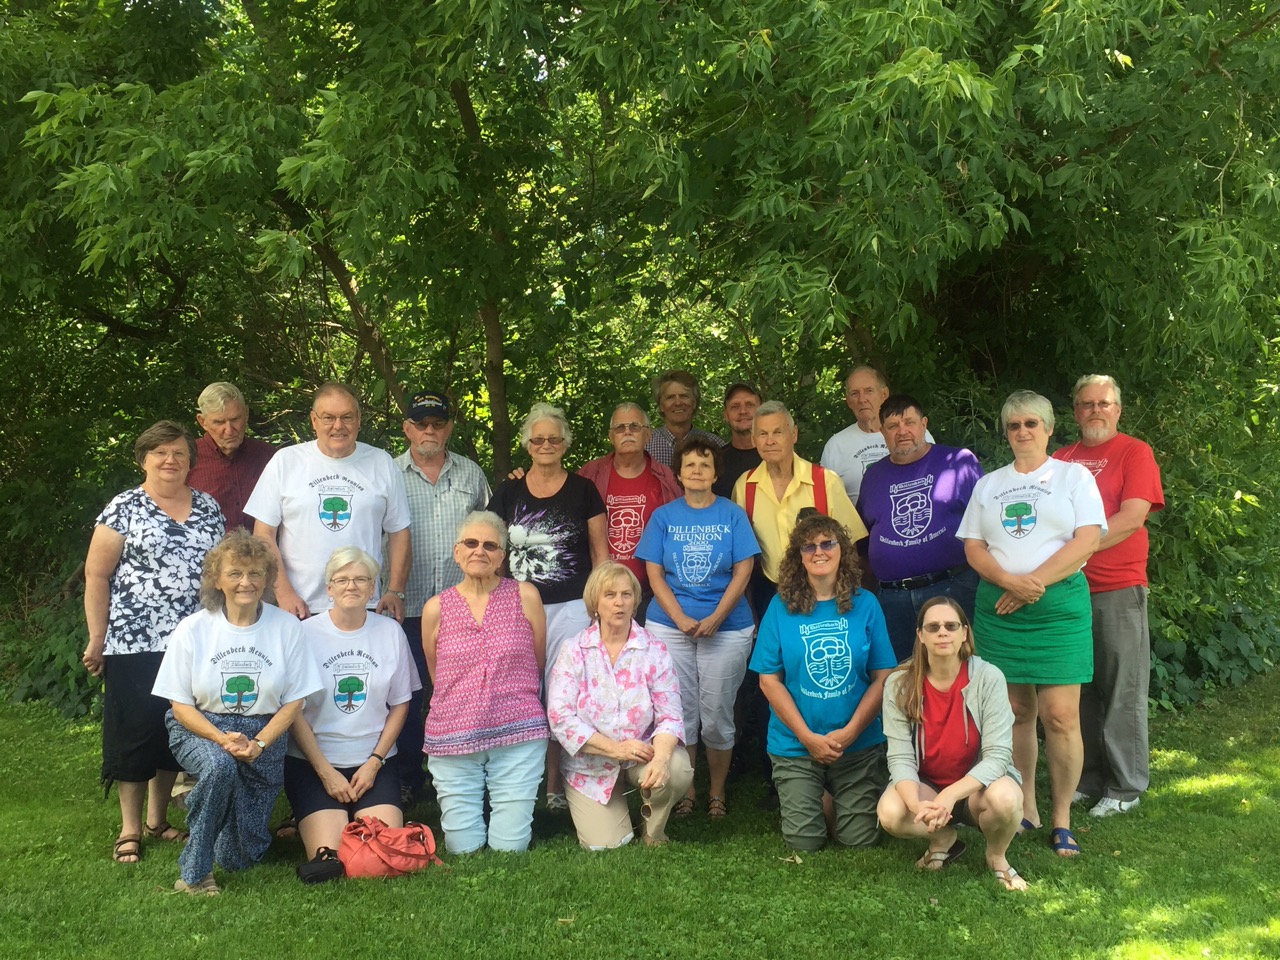 106th Annual Dillenbeck Family Reunion 2016